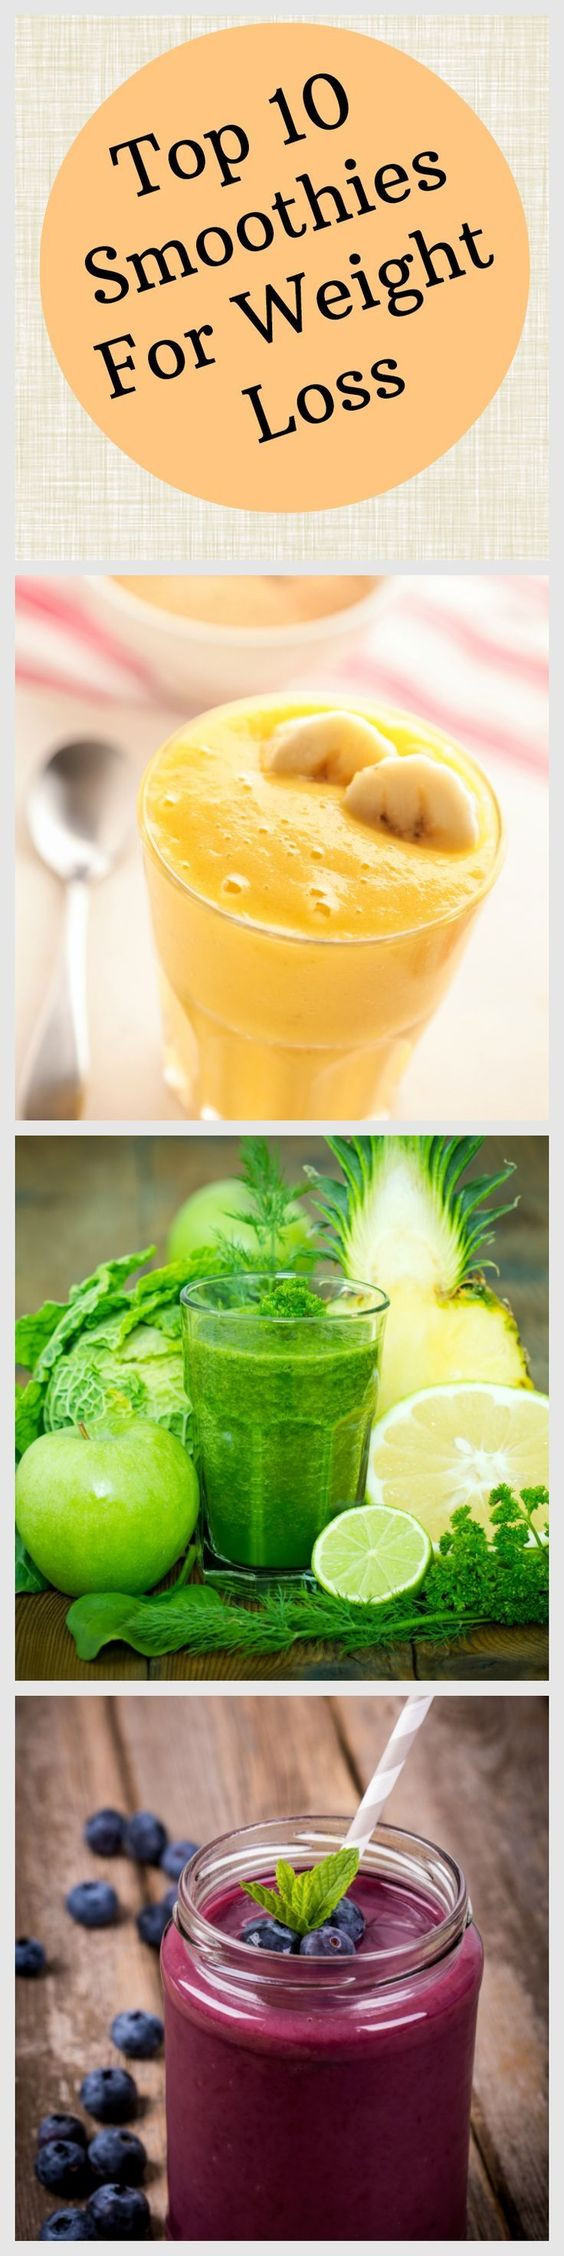 Low Calorie Smoothies Recipes For Weight Loss
 Ten Awesome Smoothies for Weight Loss low calorie but